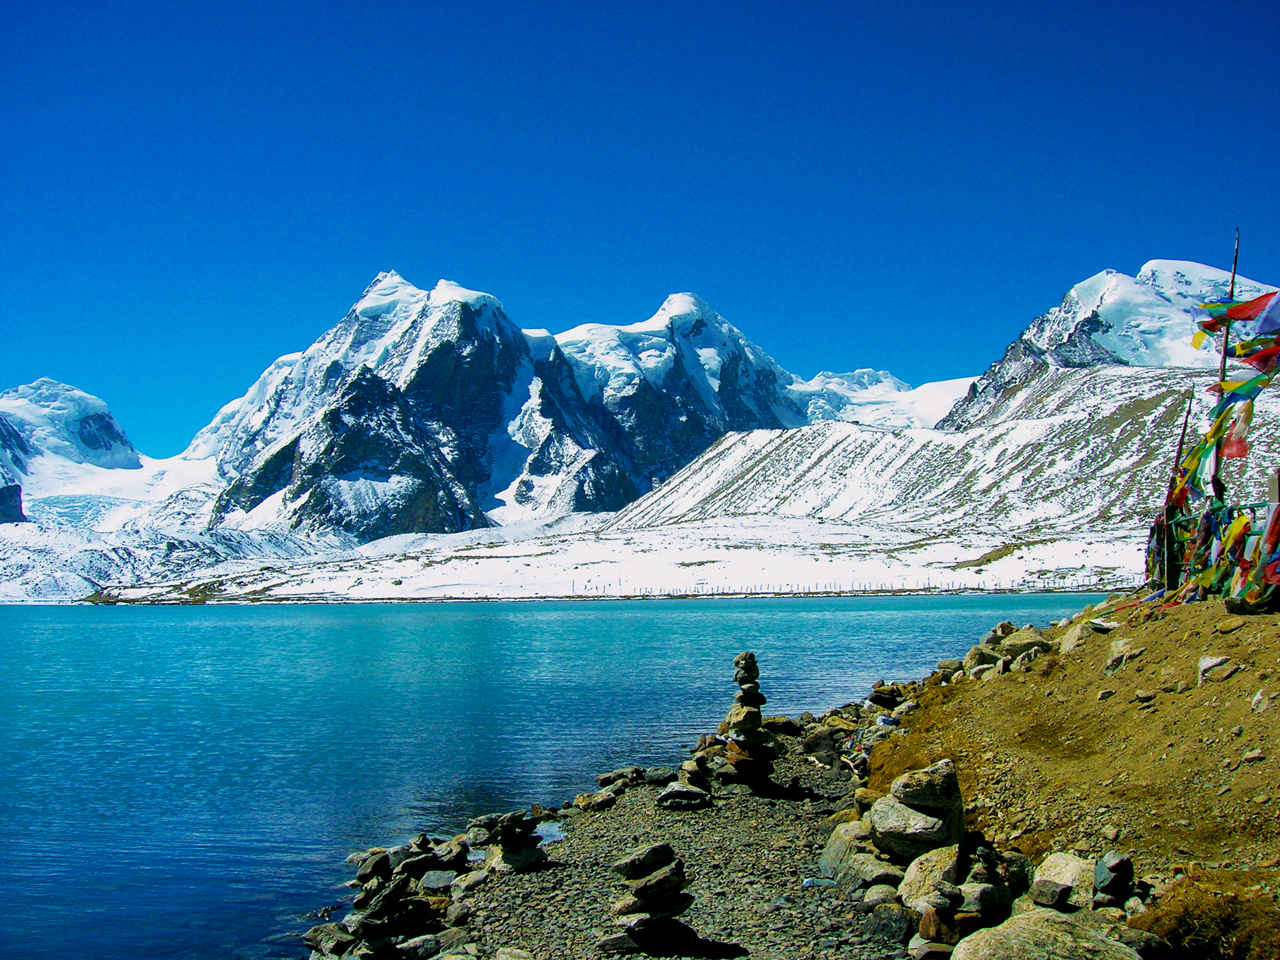 Plan a trip to Sikkim this year: Places, Trekking & Lakes